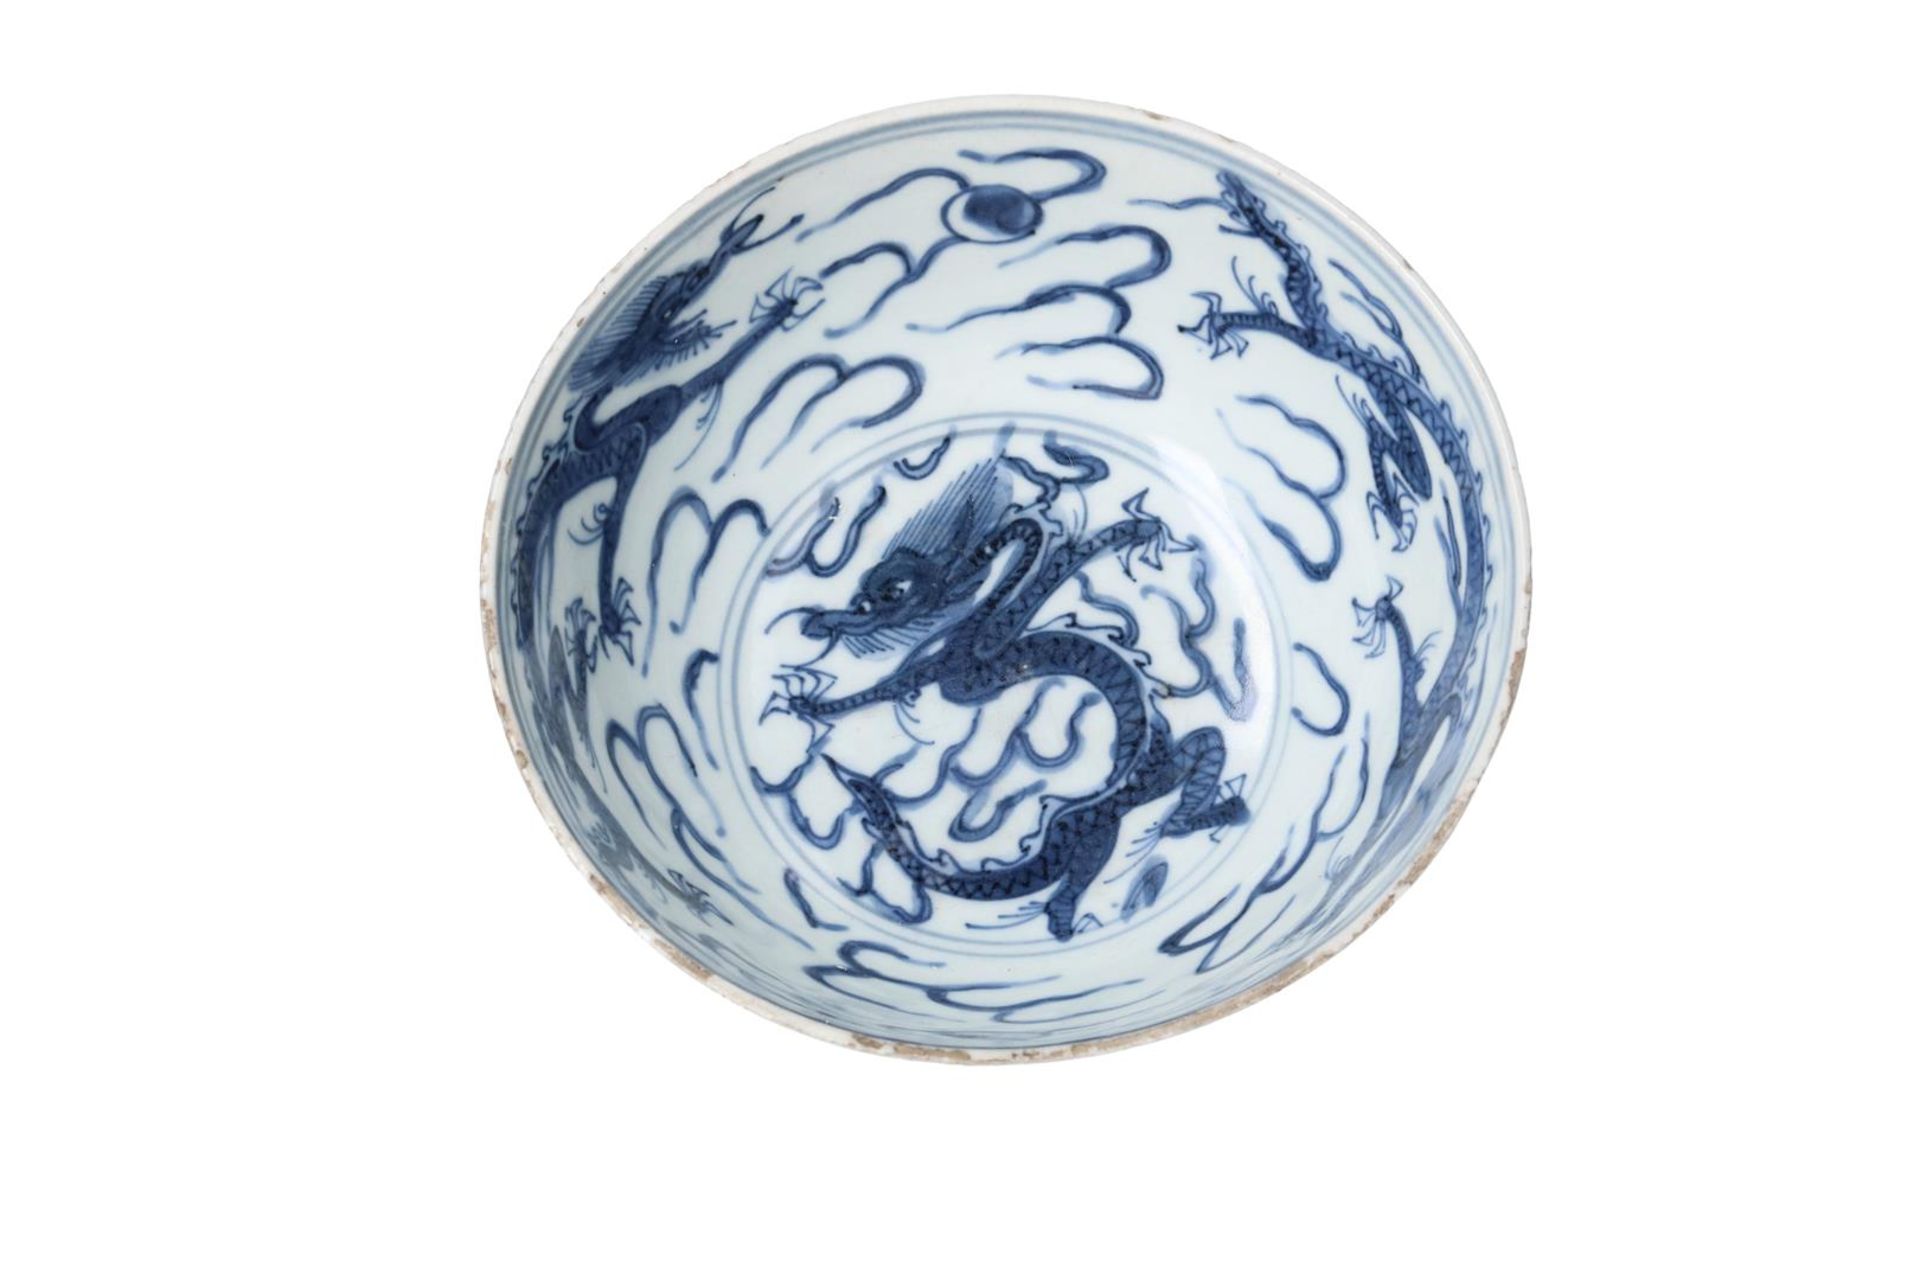 A blue and white porcelain bowl, decorated with dragons chasing a flaming pearl. Unmarked. China, - Image 5 of 6